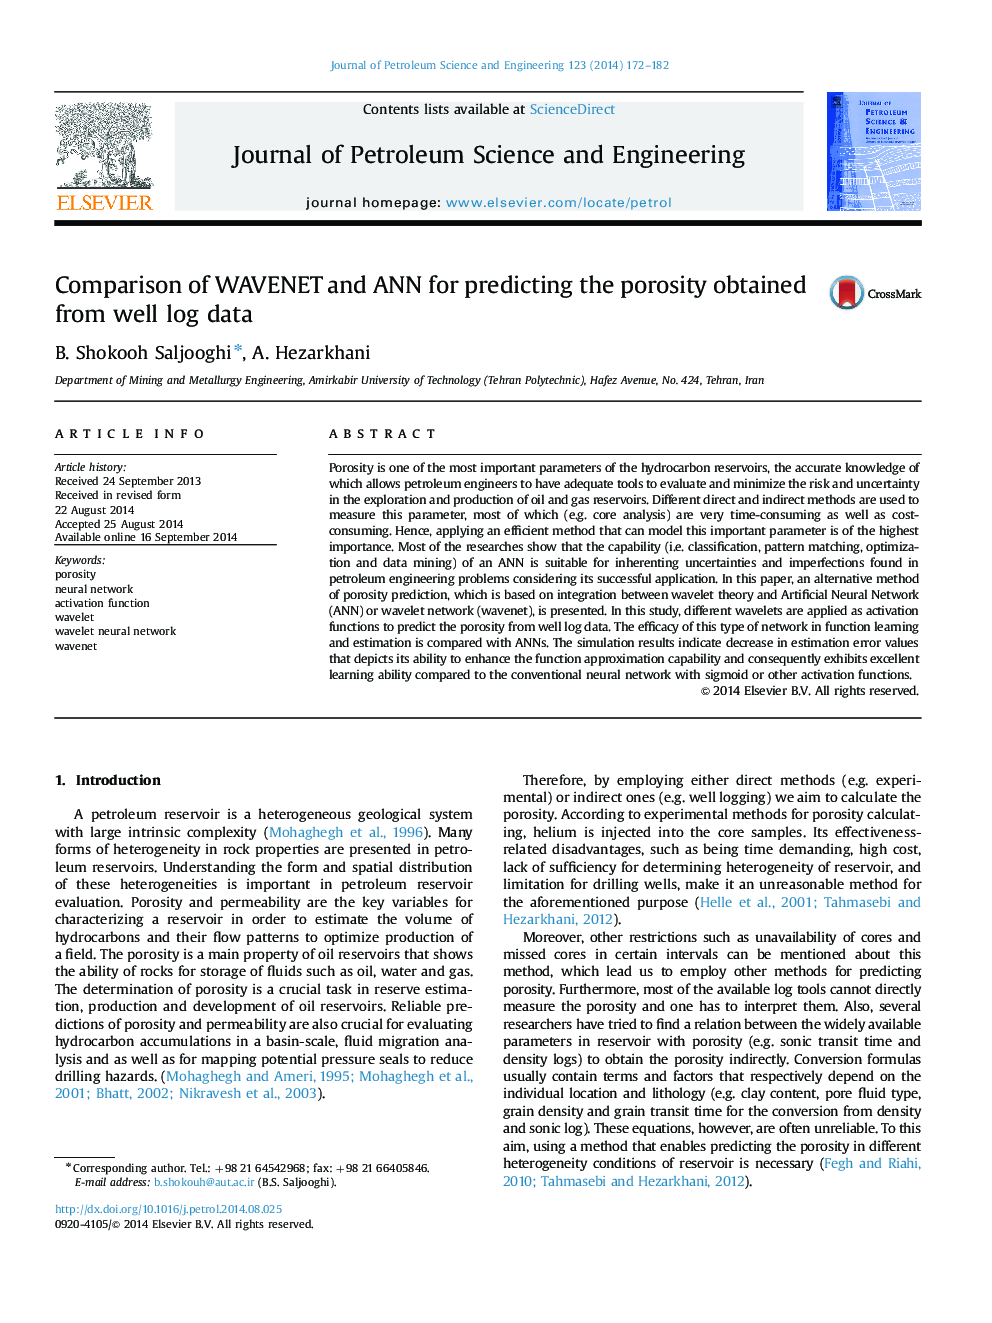 Comparison of WAVENET and ANN for predicting the porosity obtained from well log data